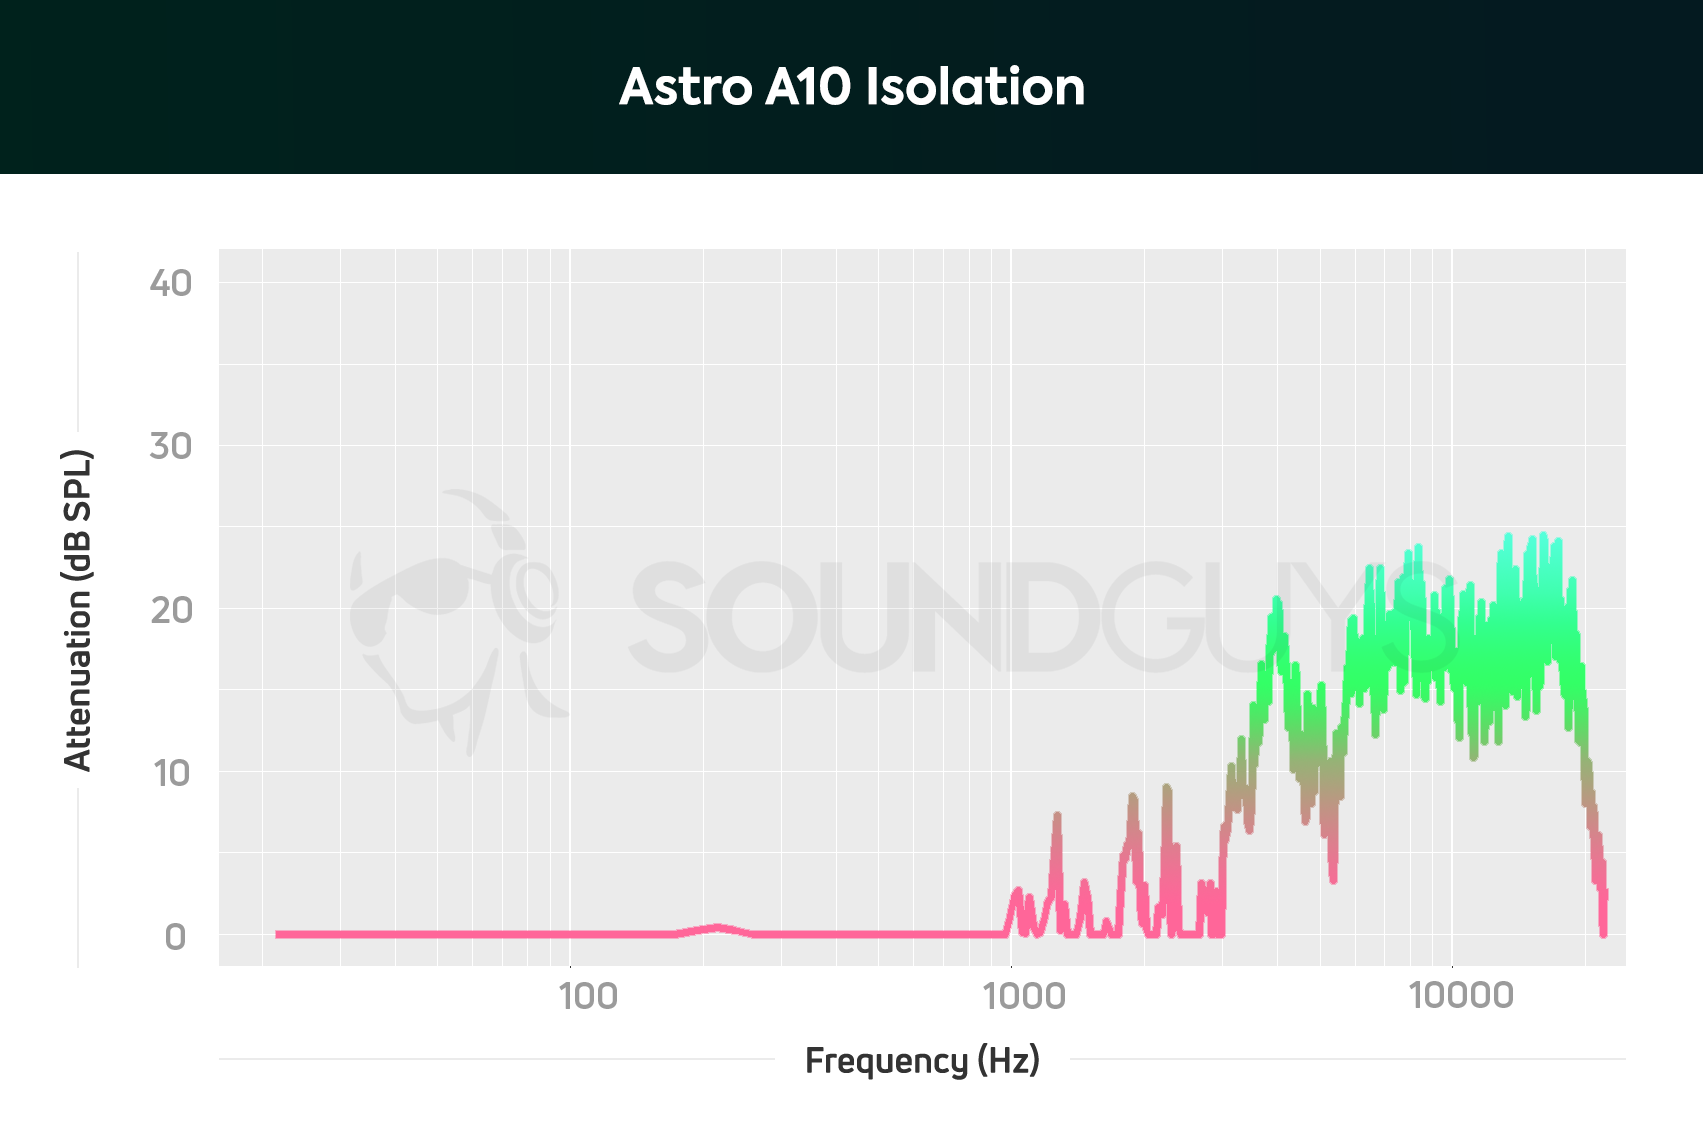 An isolation chart for the Astro A10